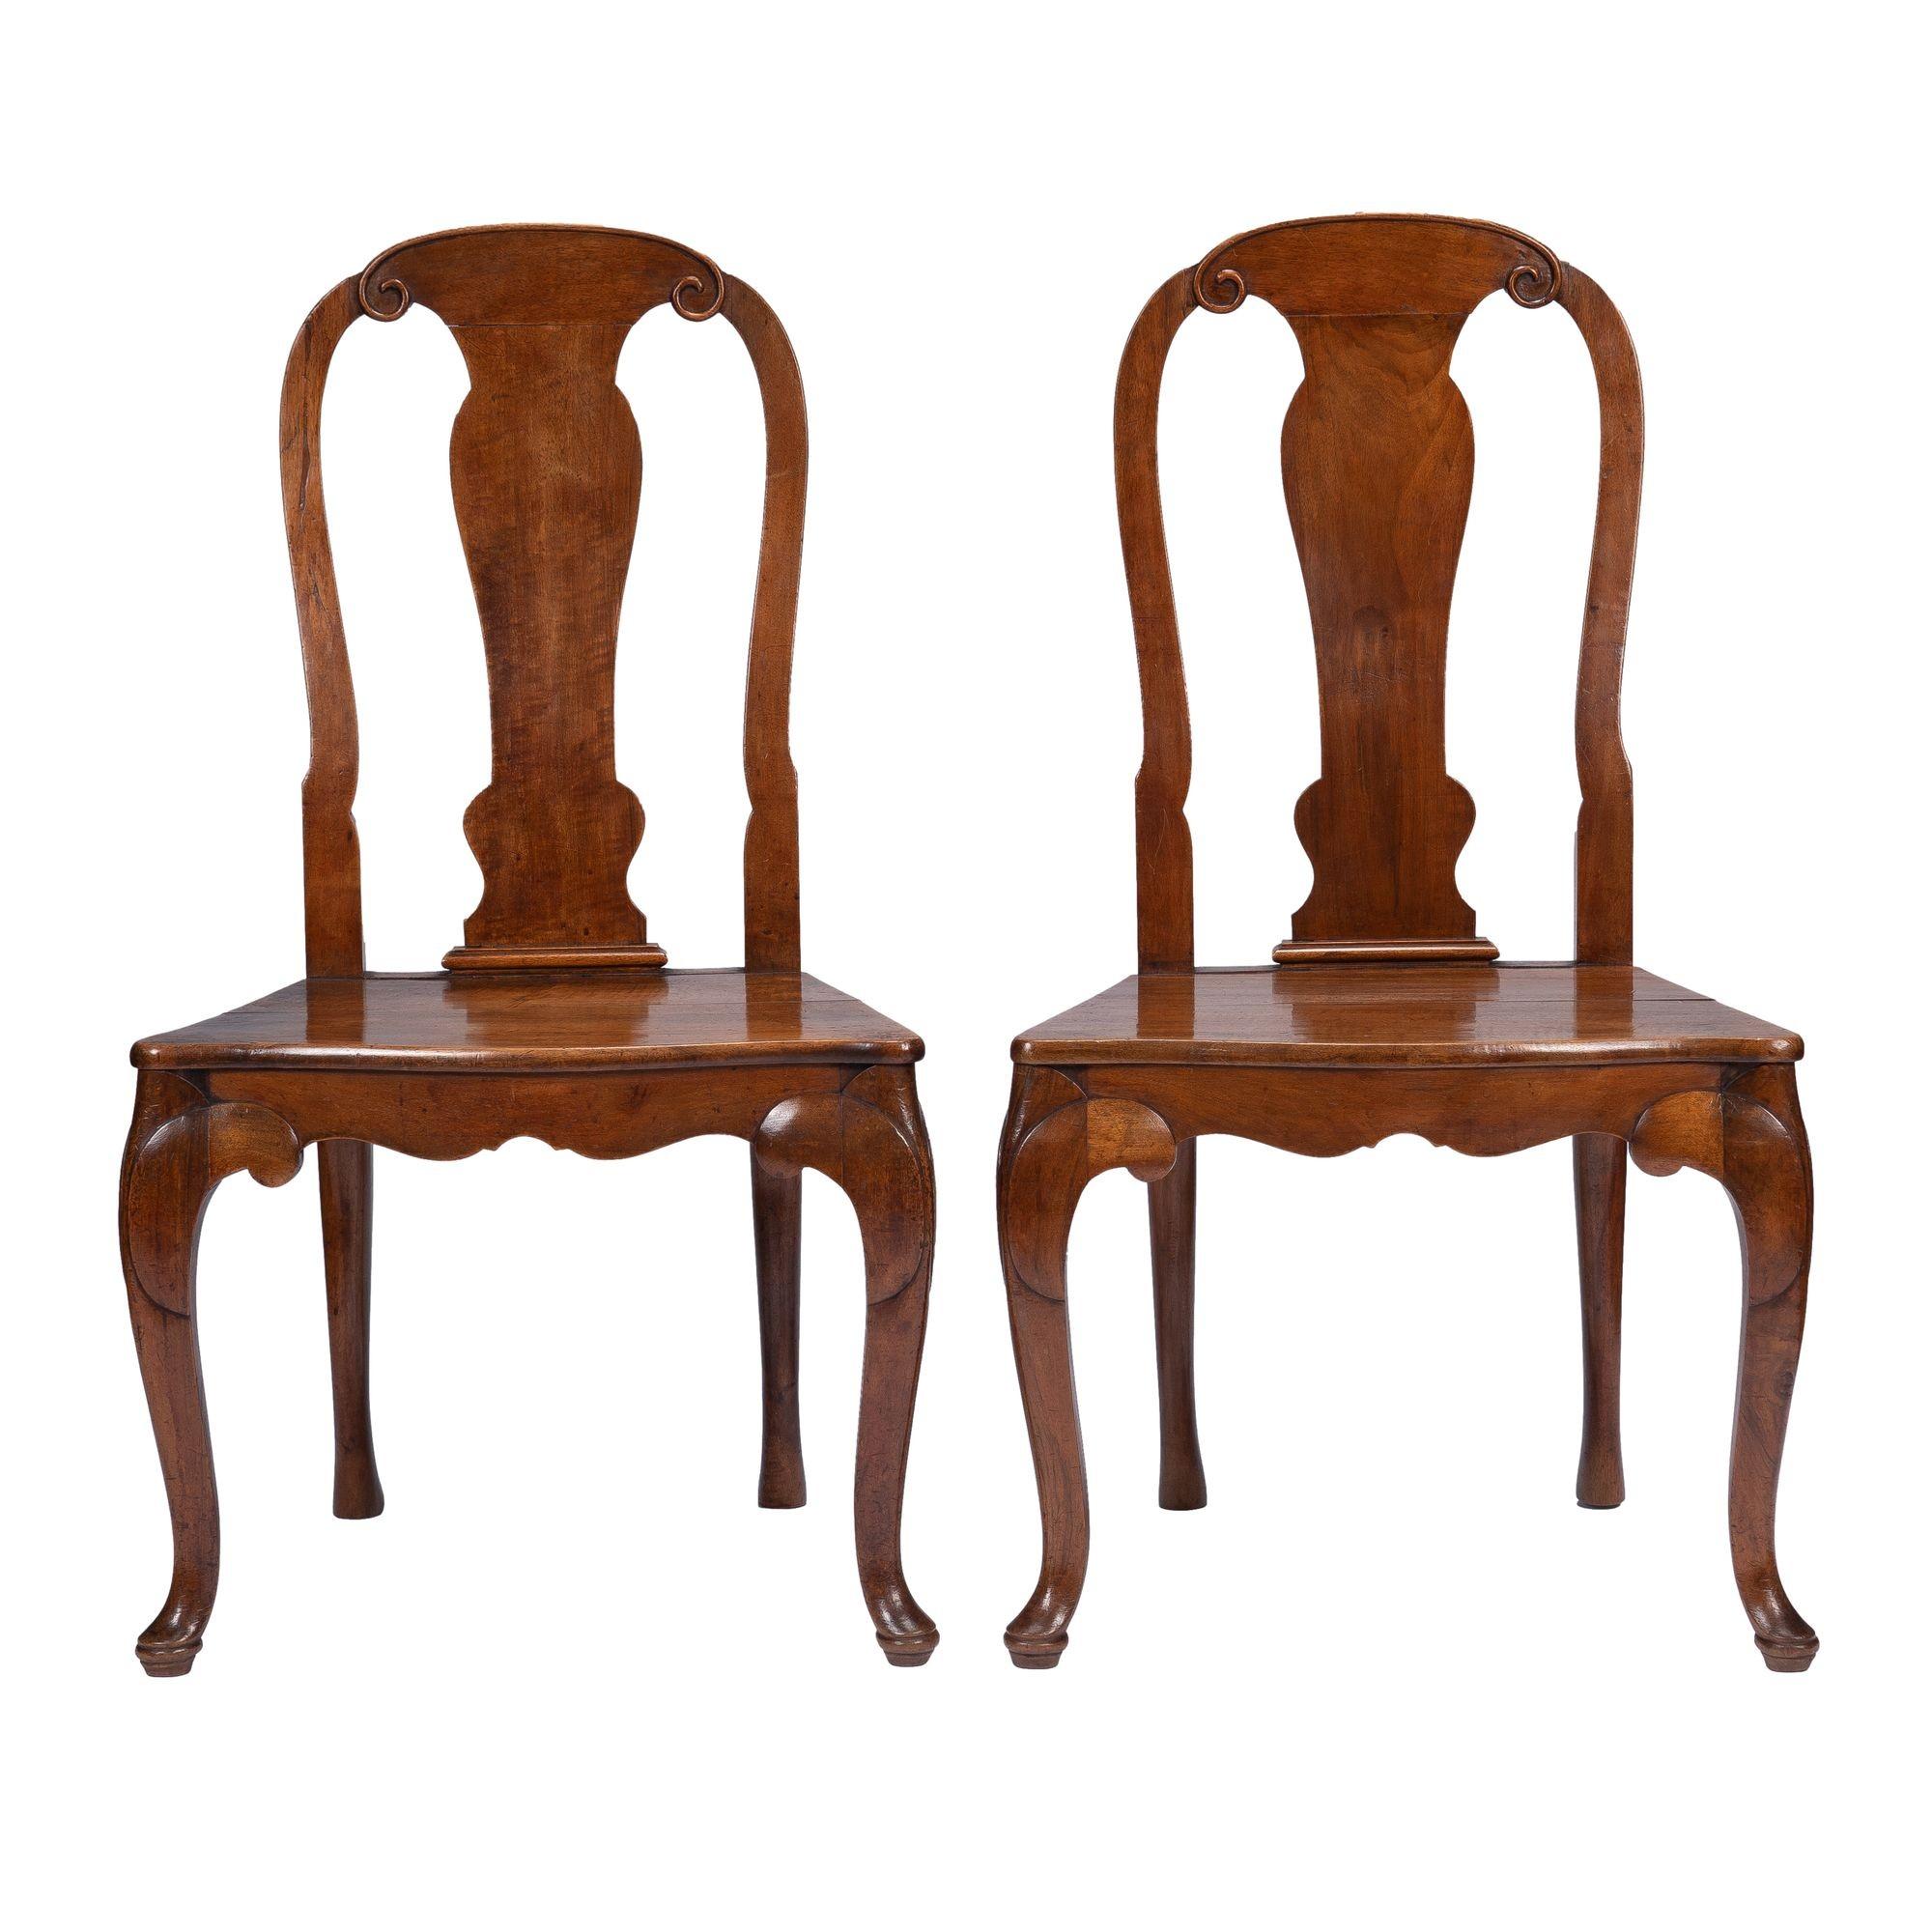 Pair of French walnut plank seat hall chairs on cabriole legs in the Louis XV taste. The tall chair backs frame a shaped central back splat which terminate in a shoe at the base of the plank seat. The chairs are fitted with custom boxed seat